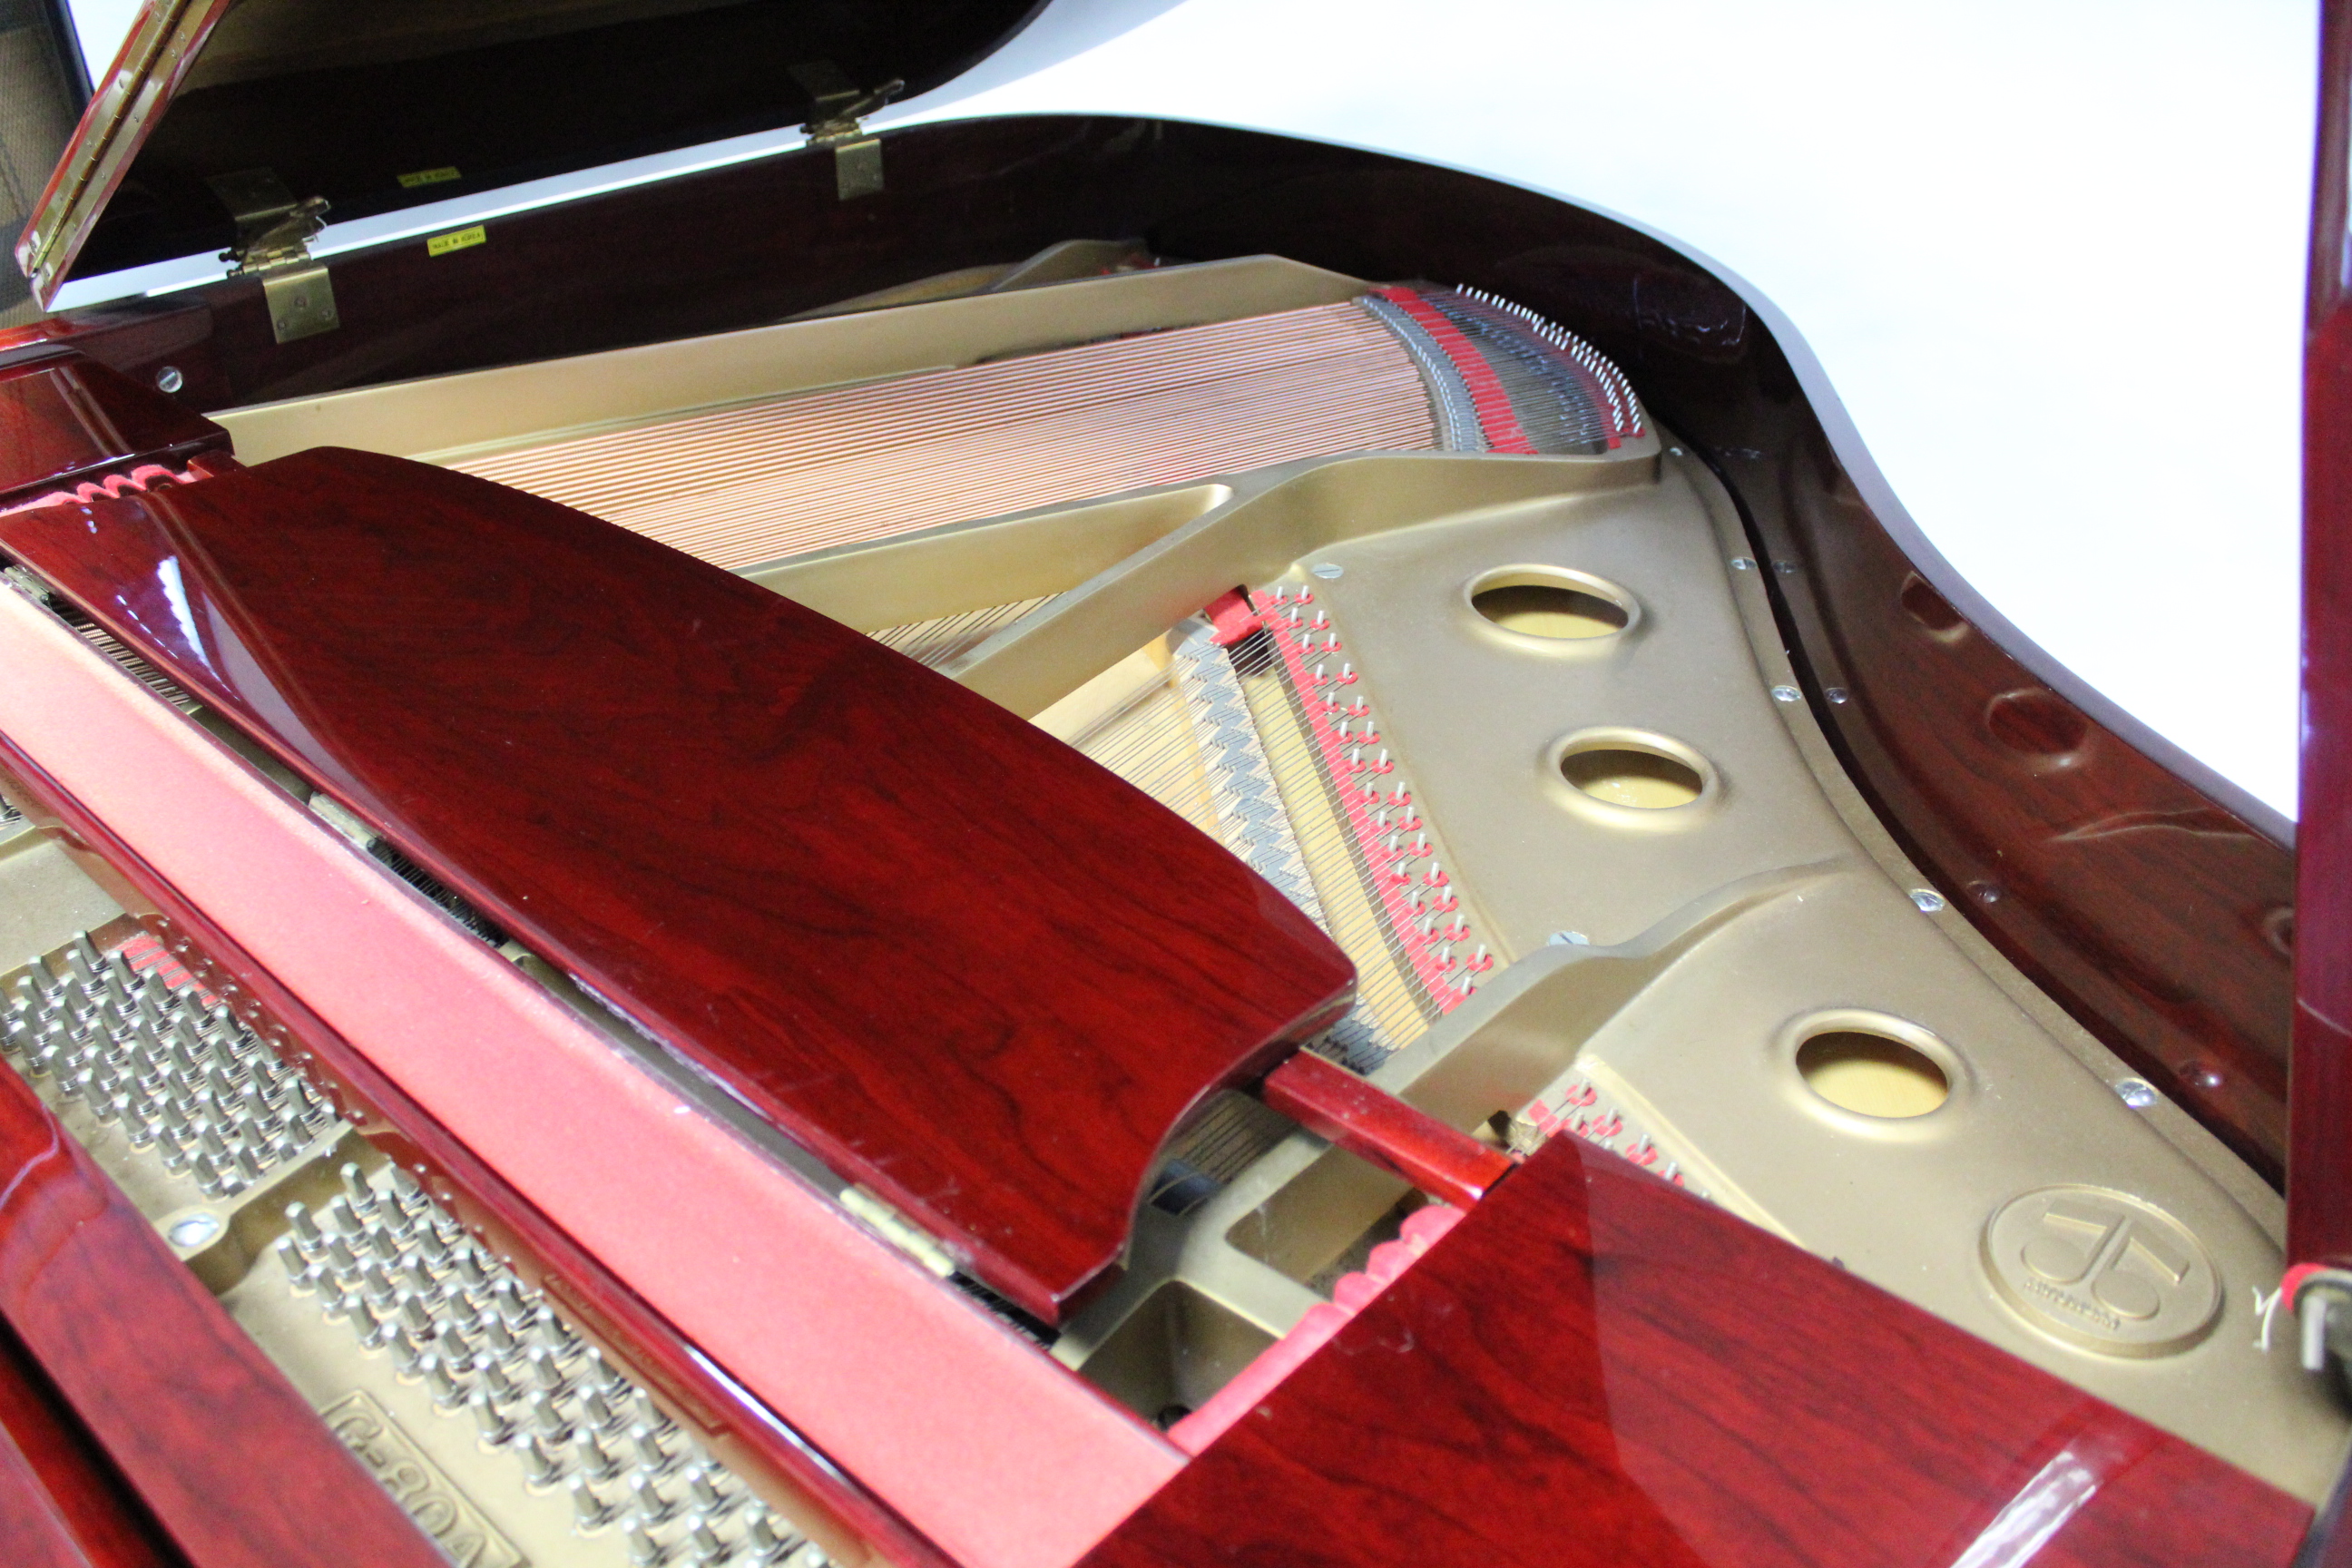 A HYUNDAI BABY GRAND PIANO with over-strung iron frame, model G-80A, No. 8707550, in rosewood case - Image 3 of 9